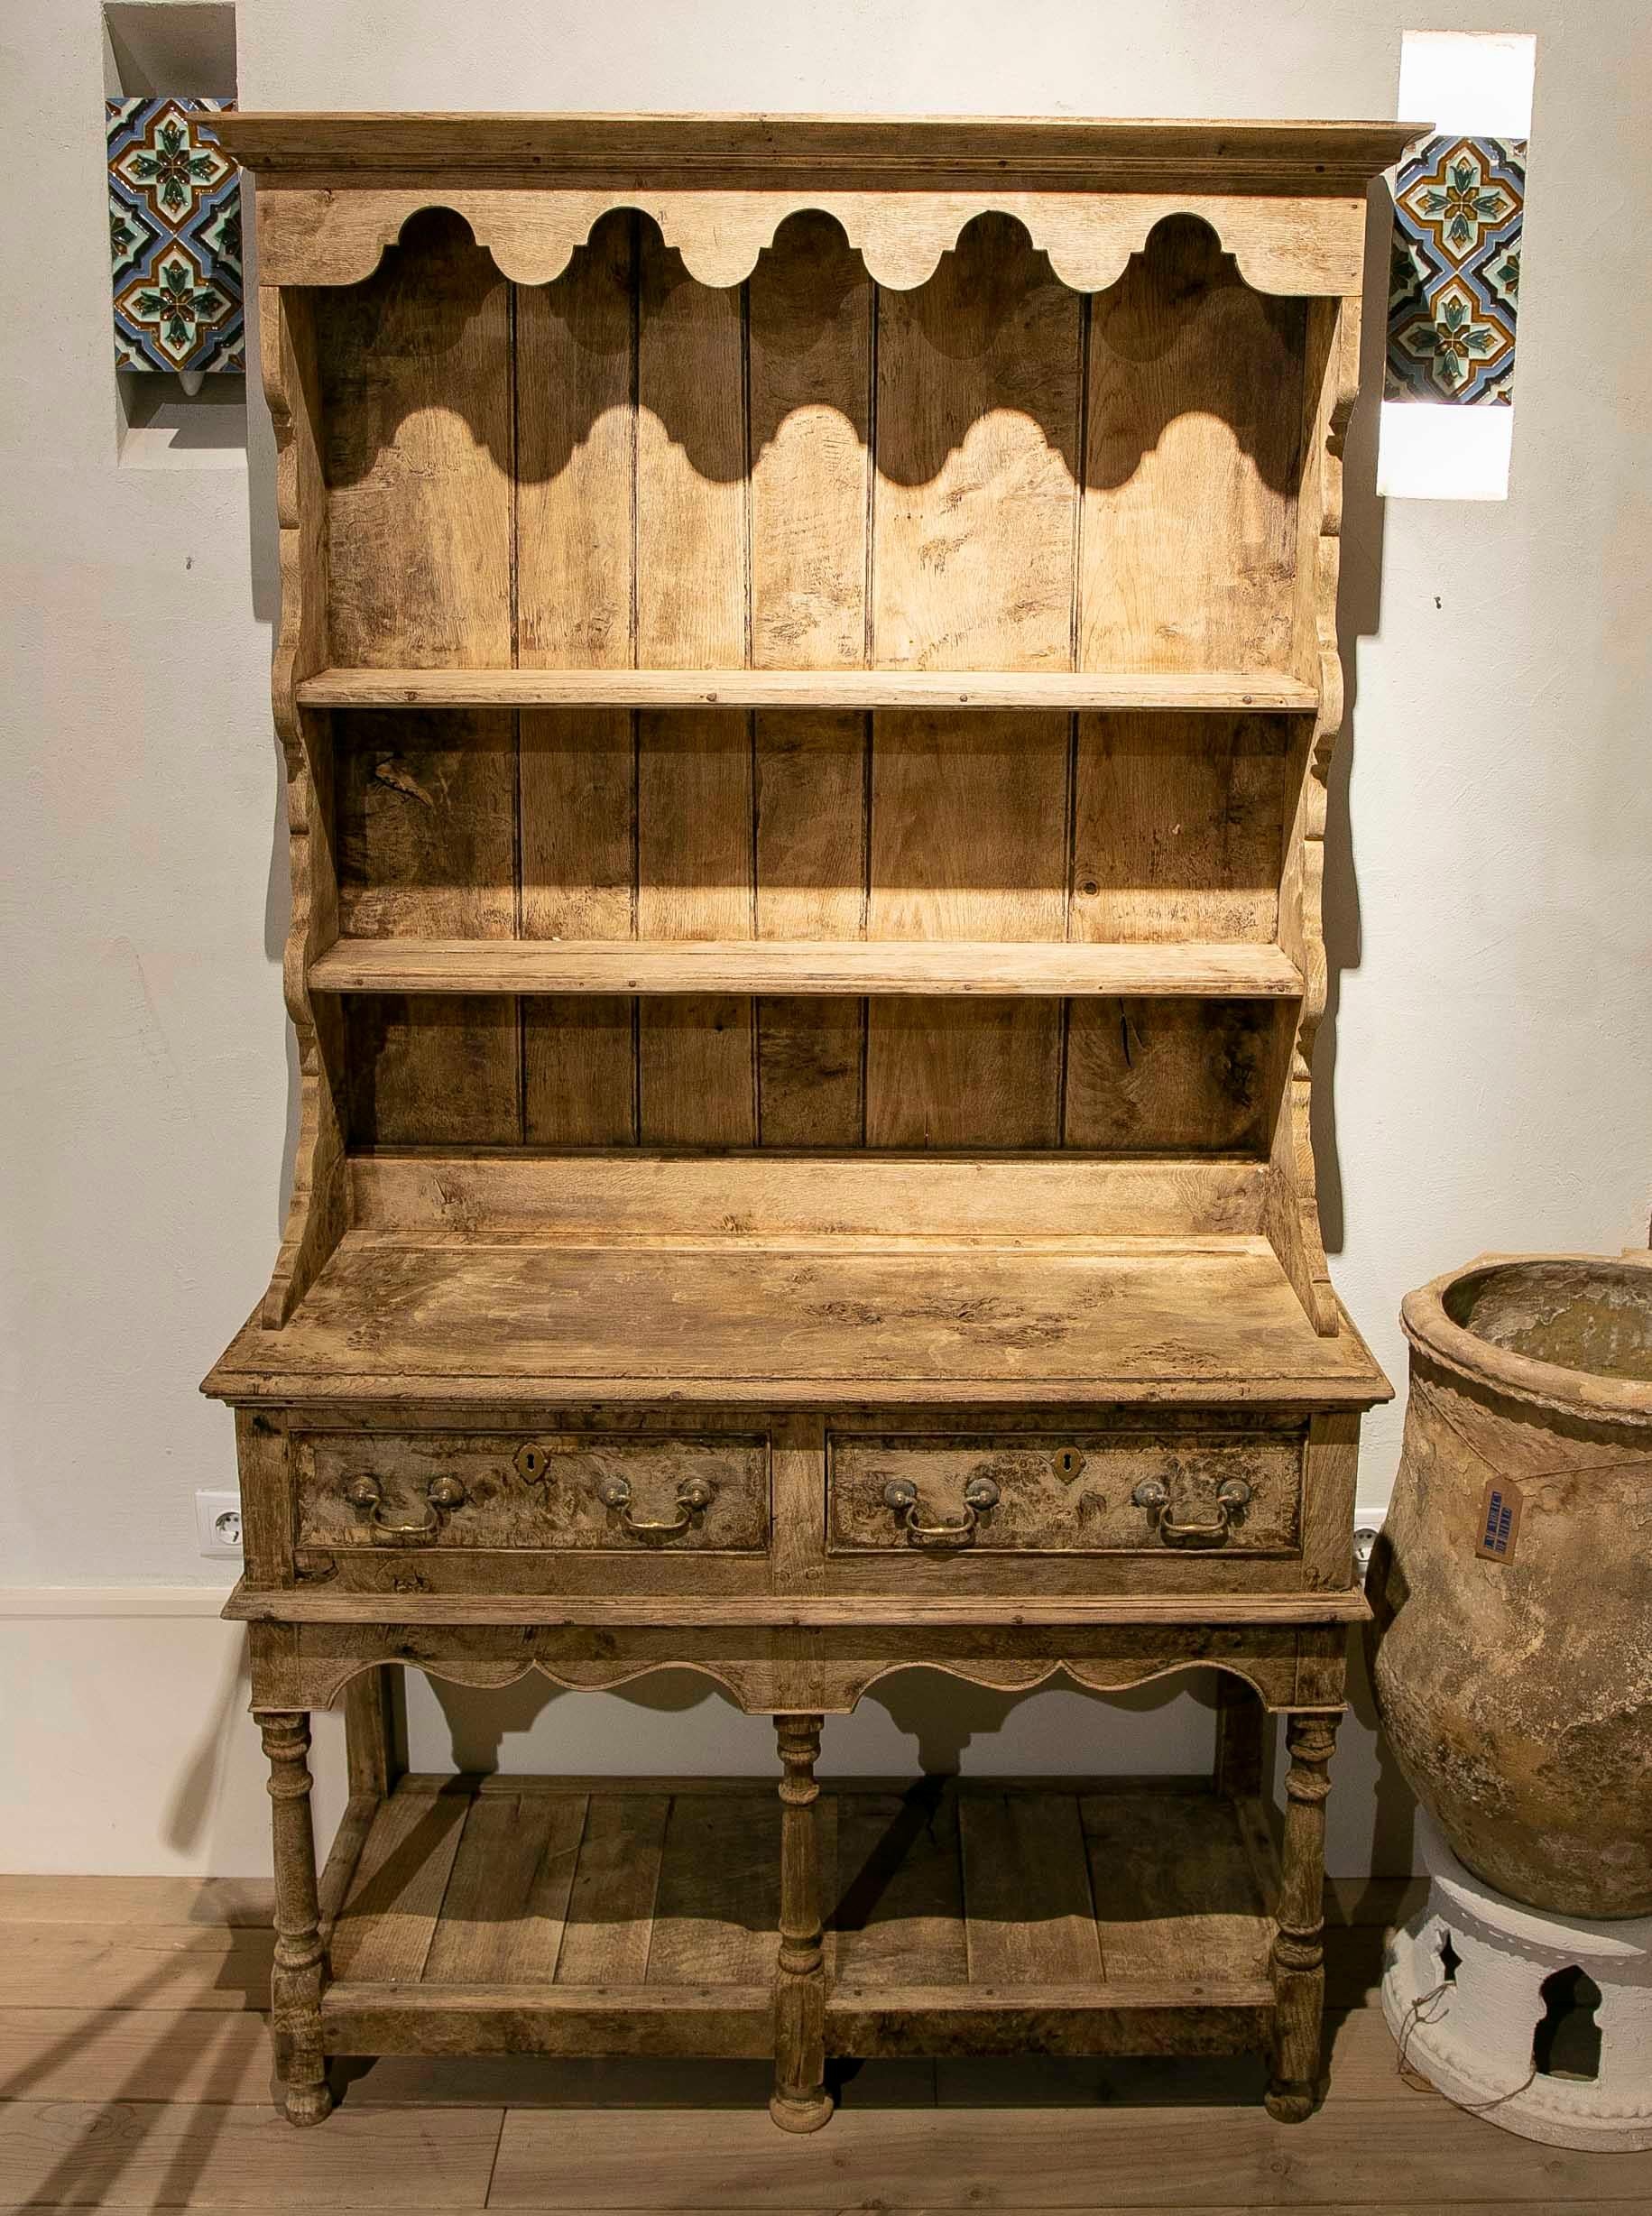 19th Century English Wooden Chest, Drawers, Shelves with decorative skirt on Top For Sale 12